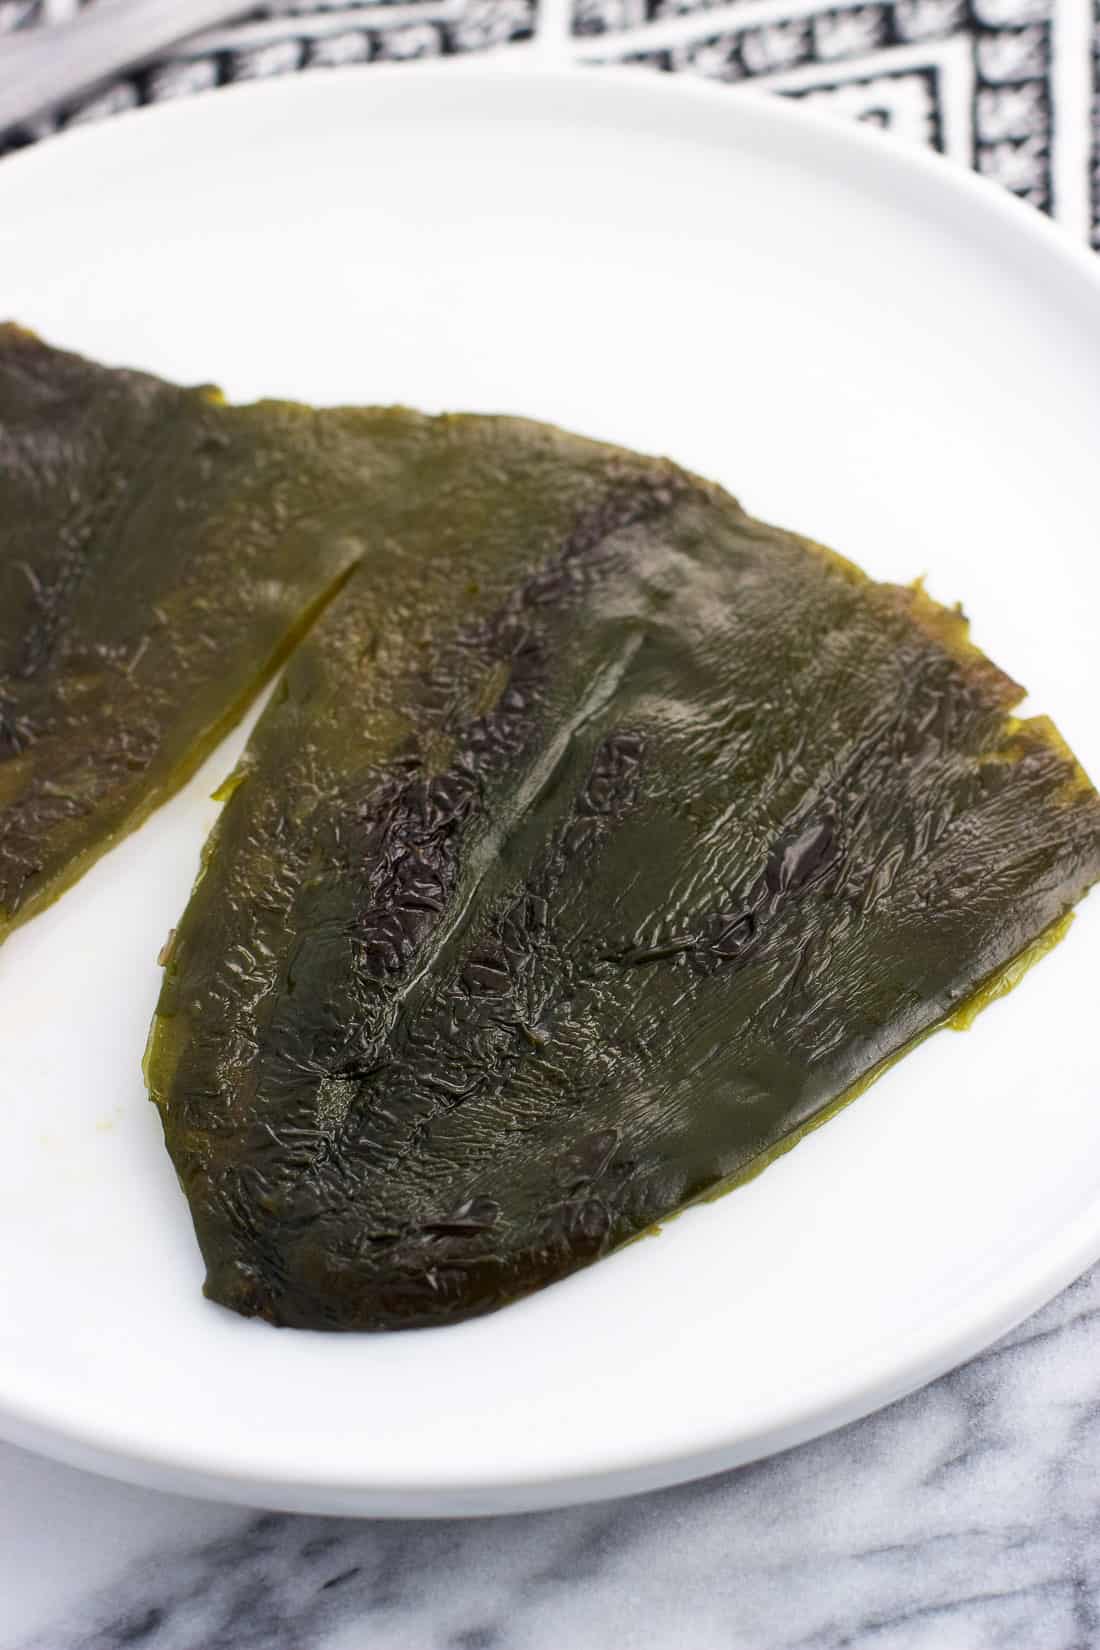 A roasted poblano pepper sliced and deseeded to lay flat on a plate.